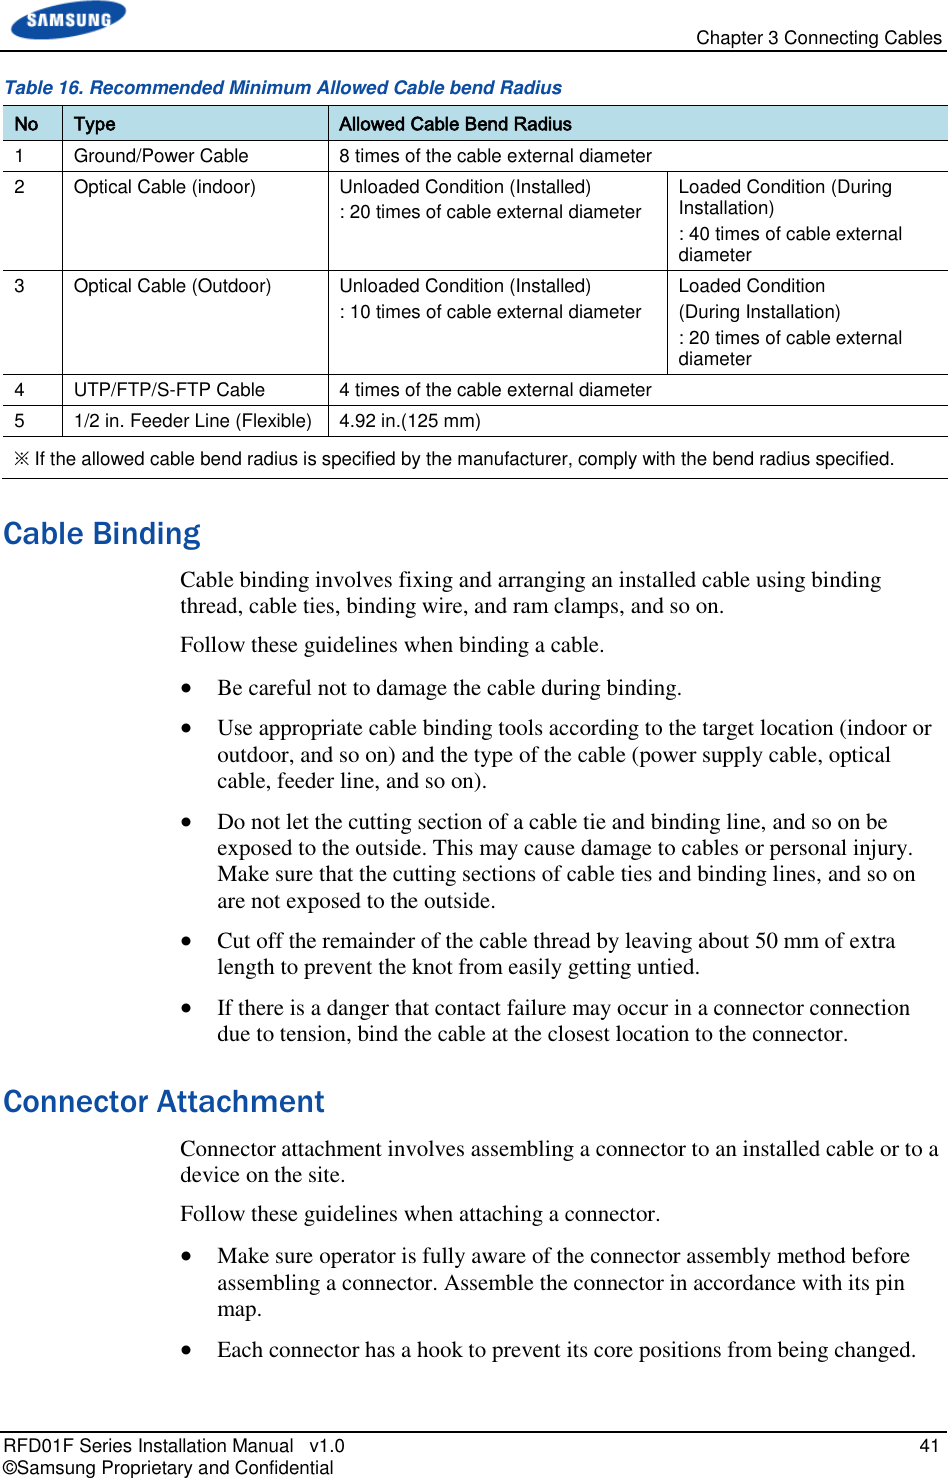   Chapter 3 Connecting Cables RFD01F Series Installation Manual   v1.0   41 © Samsung Proprietary and Confidential Table 16. Recommended Minimum Allowed Cable bend Radius No Type Allowed Cable Bend Radius 1 Ground/Power Cable 8 times of the cable external diameter 2 Optical Cable (indoor) Unloaded Condition (Installed)  : 20 times of cable external diameter Loaded Condition (During Installation) : 40 times of cable external diameter 3 Optical Cable (Outdoor) Unloaded Condition (Installed)  : 10 times of cable external diameter Loaded Condition  (During Installation) : 20 times of cable external diameter 4 UTP/FTP/S-FTP Cable 4 times of the cable external diameter 5 1/2 in. Feeder Line (Flexible) 4.92 in.(125 mm) ※ If the allowed cable bend radius is specified by the manufacturer, comply with the bend radius specified. Cable Binding Cable binding involves fixing and arranging an installed cable using binding thread, cable ties, binding wire, and ram clamps, and so on. Follow these guidelines when binding a cable.   Be careful not to damage the cable during binding.  Use appropriate cable binding tools according to the target location (indoor or outdoor, and so on) and the type of the cable (power supply cable, optical cable, feeder line, and so on).  Do not let the cutting section of a cable tie and binding line, and so on be exposed to the outside. This may cause damage to cables or personal injury. Make sure that the cutting sections of cable ties and binding lines, and so on are not exposed to the outside.  Cut off the remainder of the cable thread by leaving about 50 mm of extra length to prevent the knot from easily getting untied.  If there is a danger that contact failure may occur in a connector connection due to tension, bind the cable at the closest location to the connector. Connector Attachment Connector attachment involves assembling a connector to an installed cable or to a device on the site. Follow these guidelines when attaching a connector.   Make sure operator is fully aware of the connector assembly method before assembling a connector. Assemble the connector in accordance with its pin map.  Each connector has a hook to prevent its core positions from being changed.  